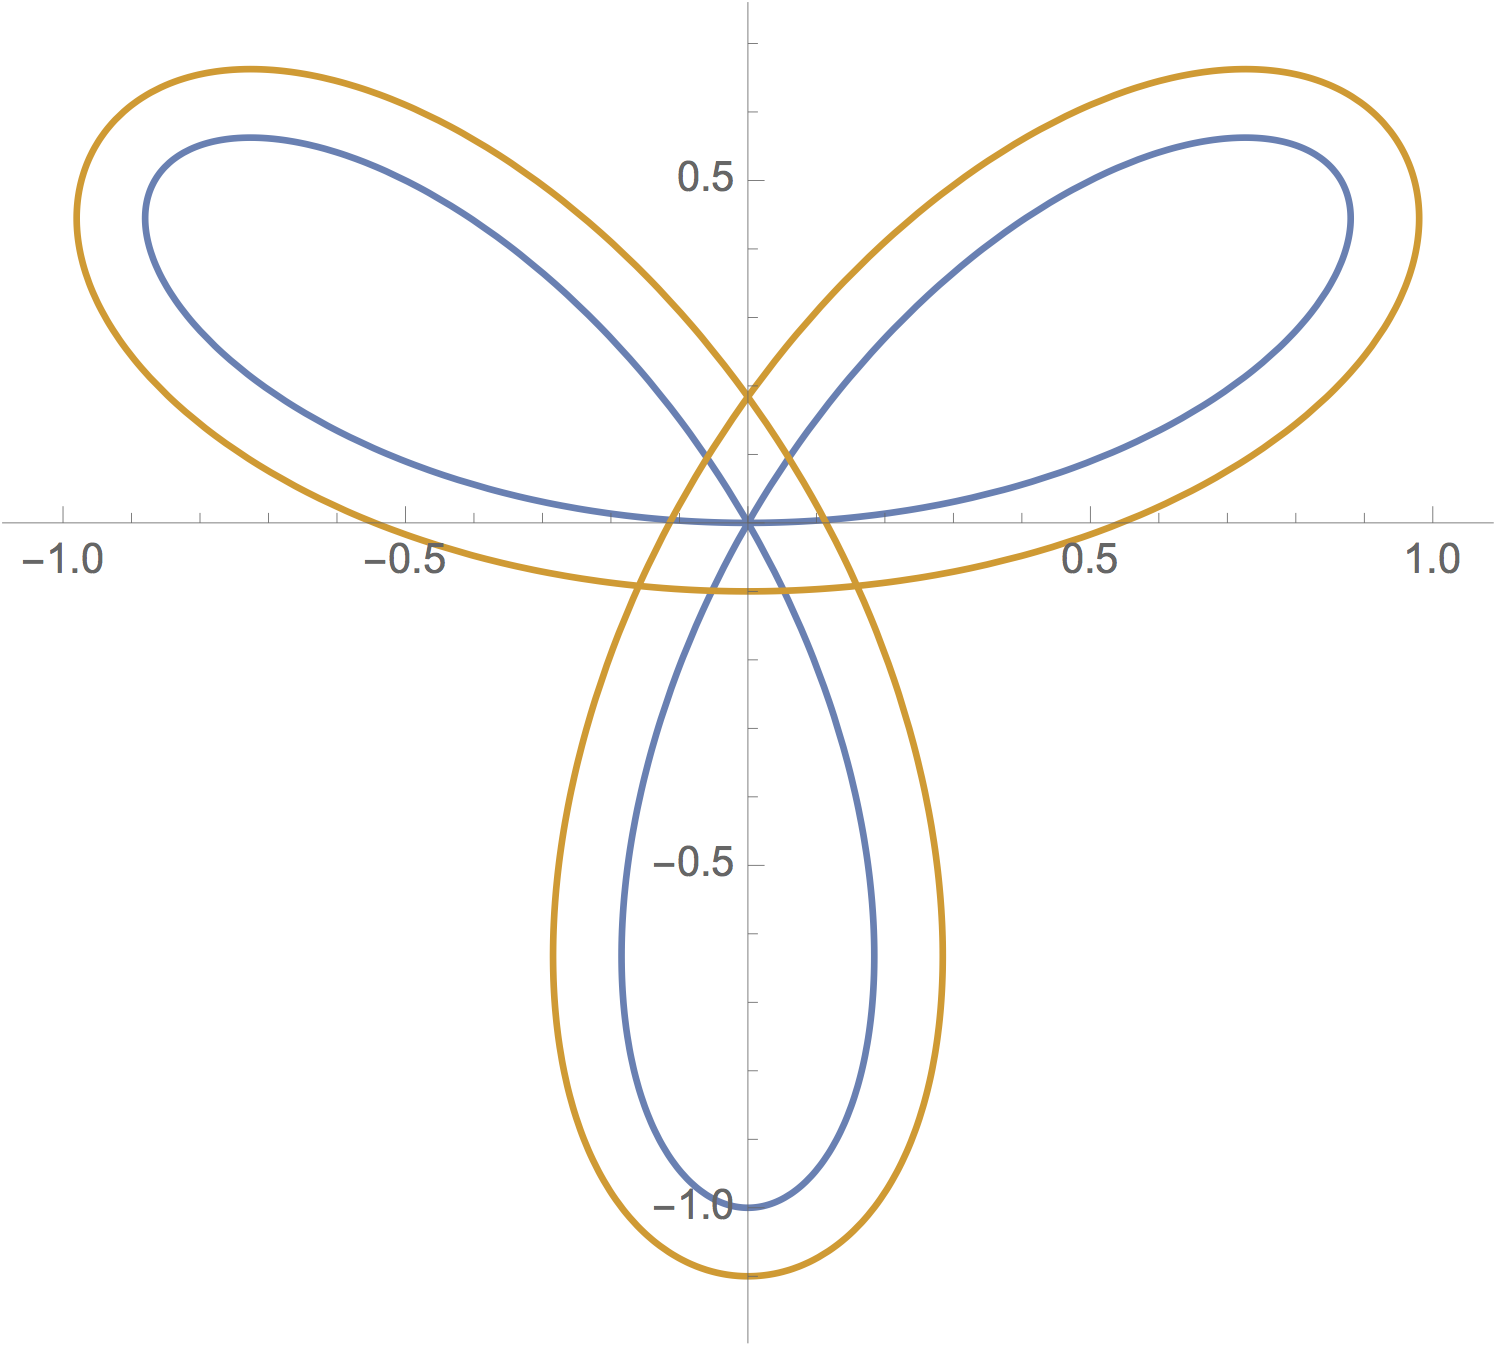 A spiraling, self-crossing curve and its parallel counterpart. Tracing along the inner curve ${\bf p}$, observe that the tangent vector ${\bf p}'$ twists around _twice_ as we traverse the curve (note it is horizontal at $(0, -1)$). In this case, the arclengths differ by $2\pi d \cdot 2 = 4\pi d$.